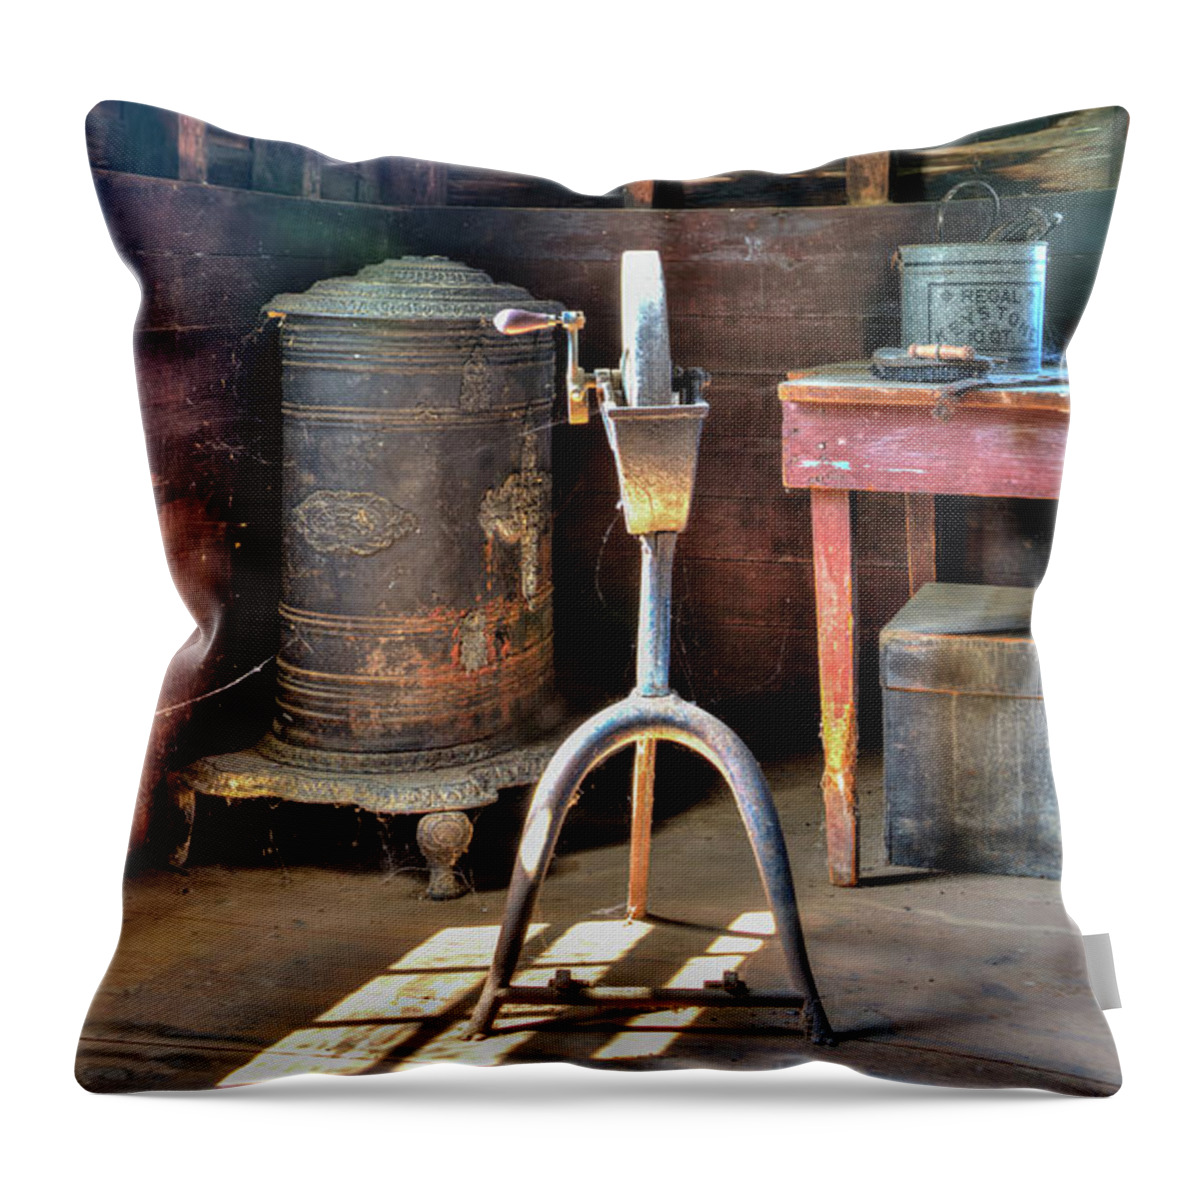 Workshop Throw Pillow featuring the photograph Historic Barn Workshop by Gary Slawsky